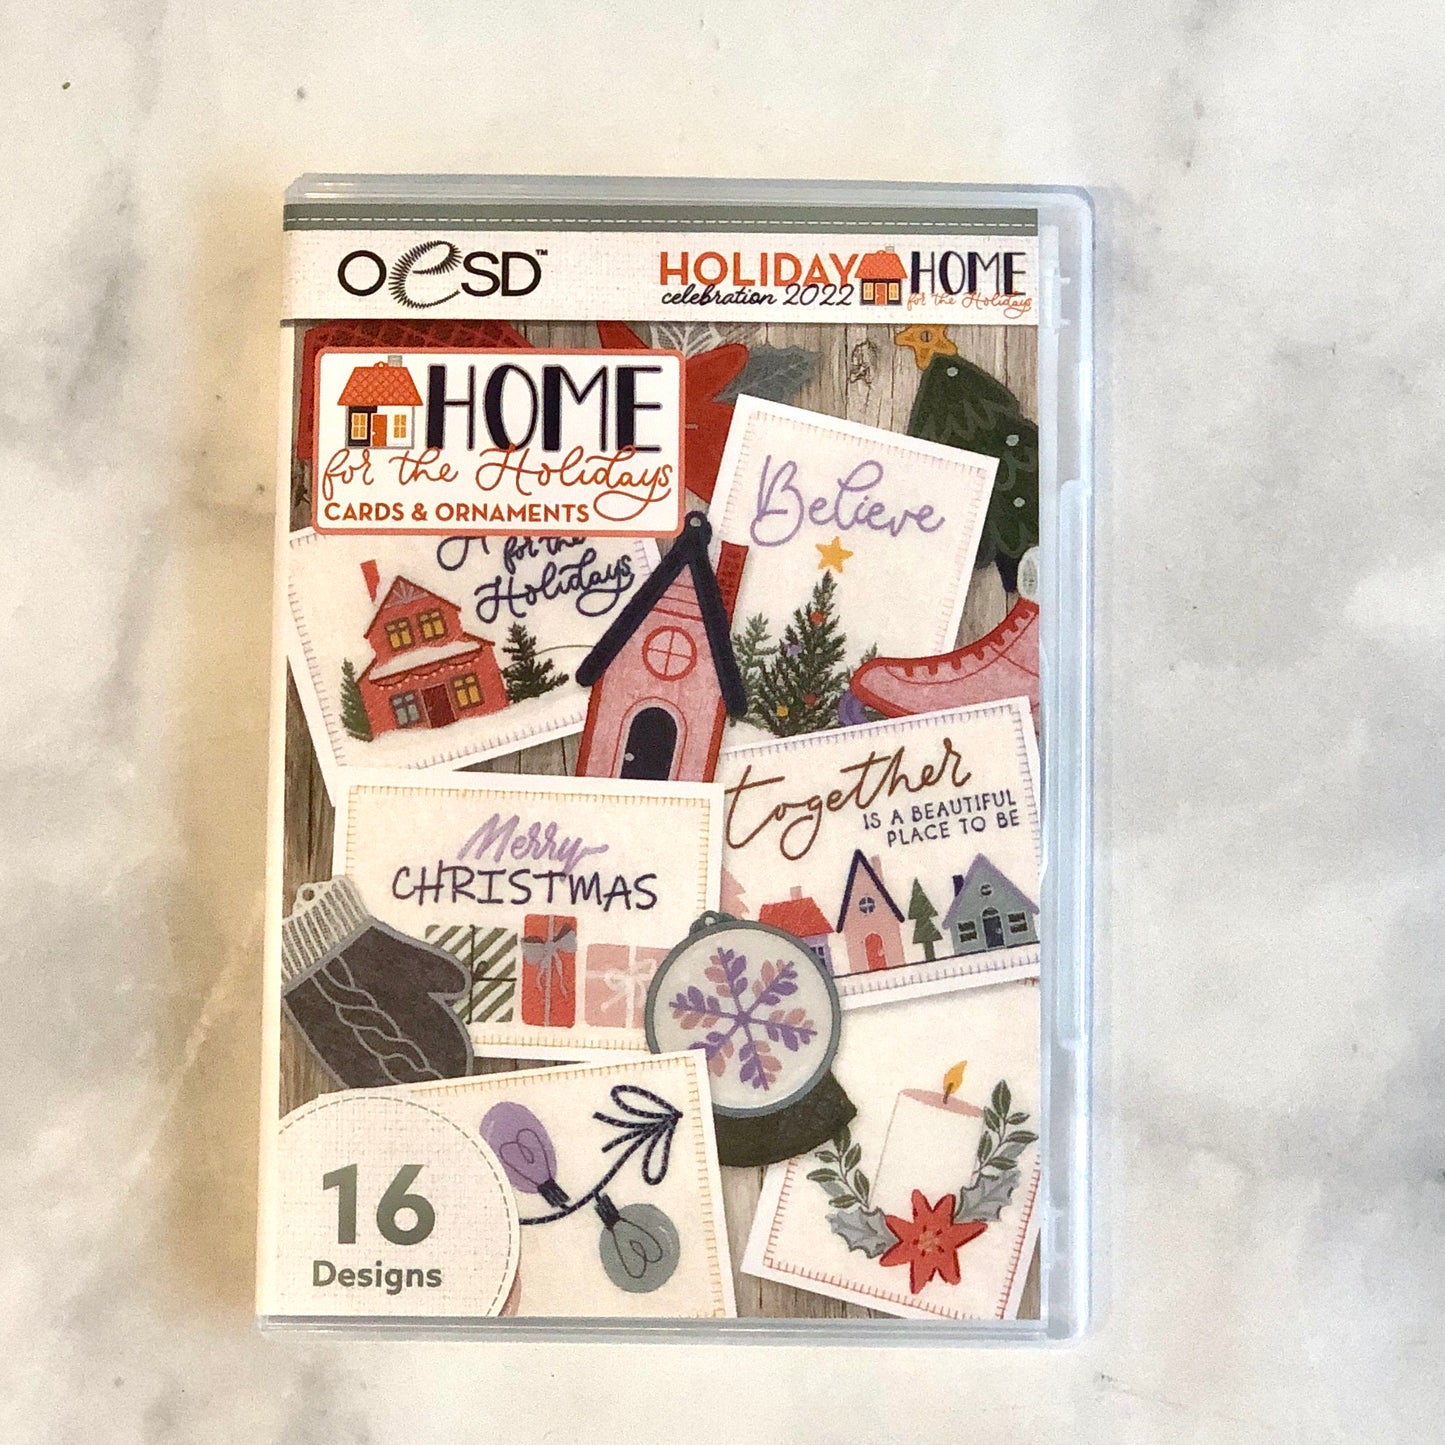 Home for the Holidays CDs: Cards + Ornaments